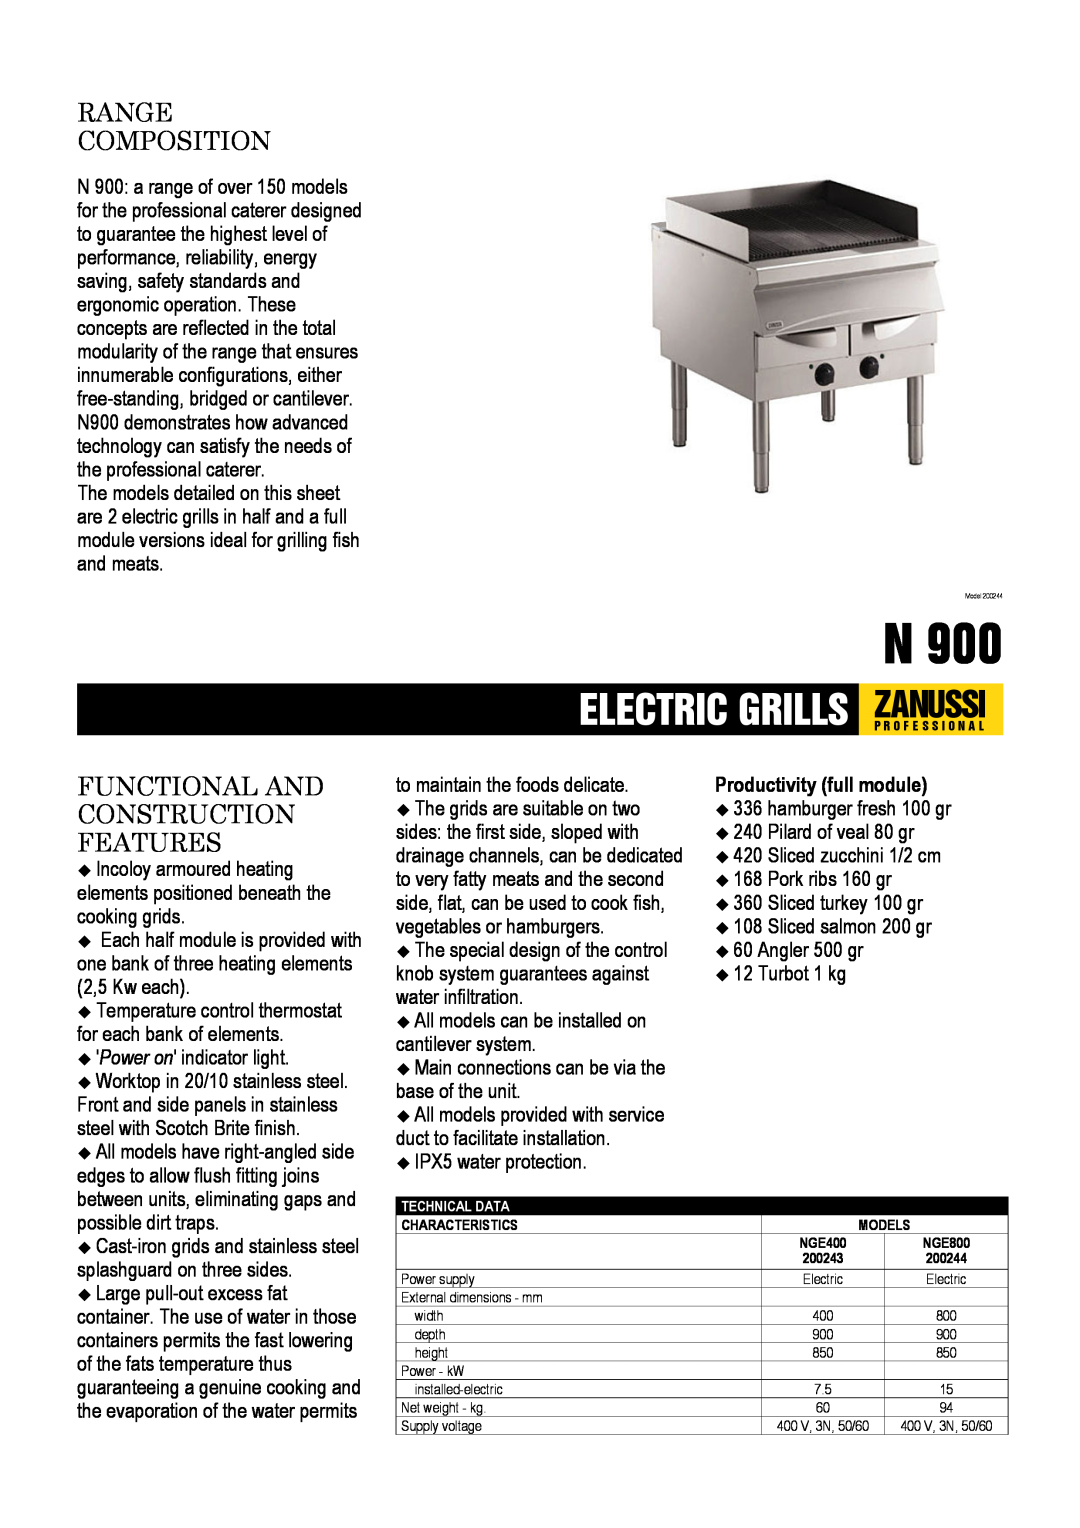 Electrolux NGE400, NGE800 dimensions Zanussi, Electric Grills, Range Composition, Functional And Construction Features 